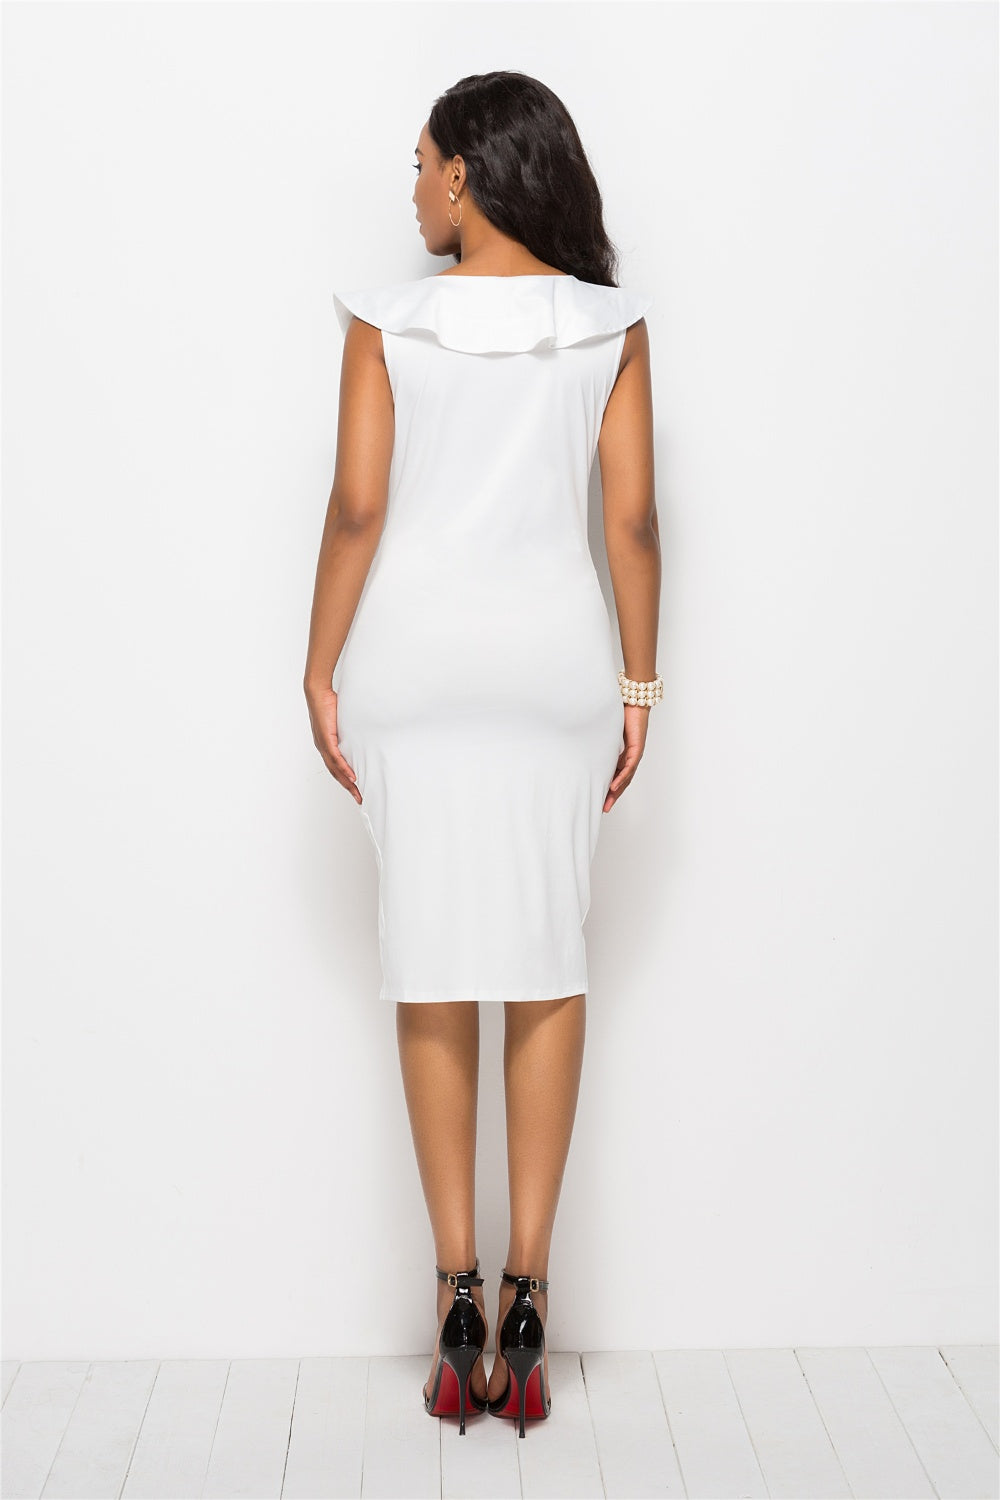 Ruched Ruffled Cap Sleeve Midi Dress - Cheeky Chic Boutique